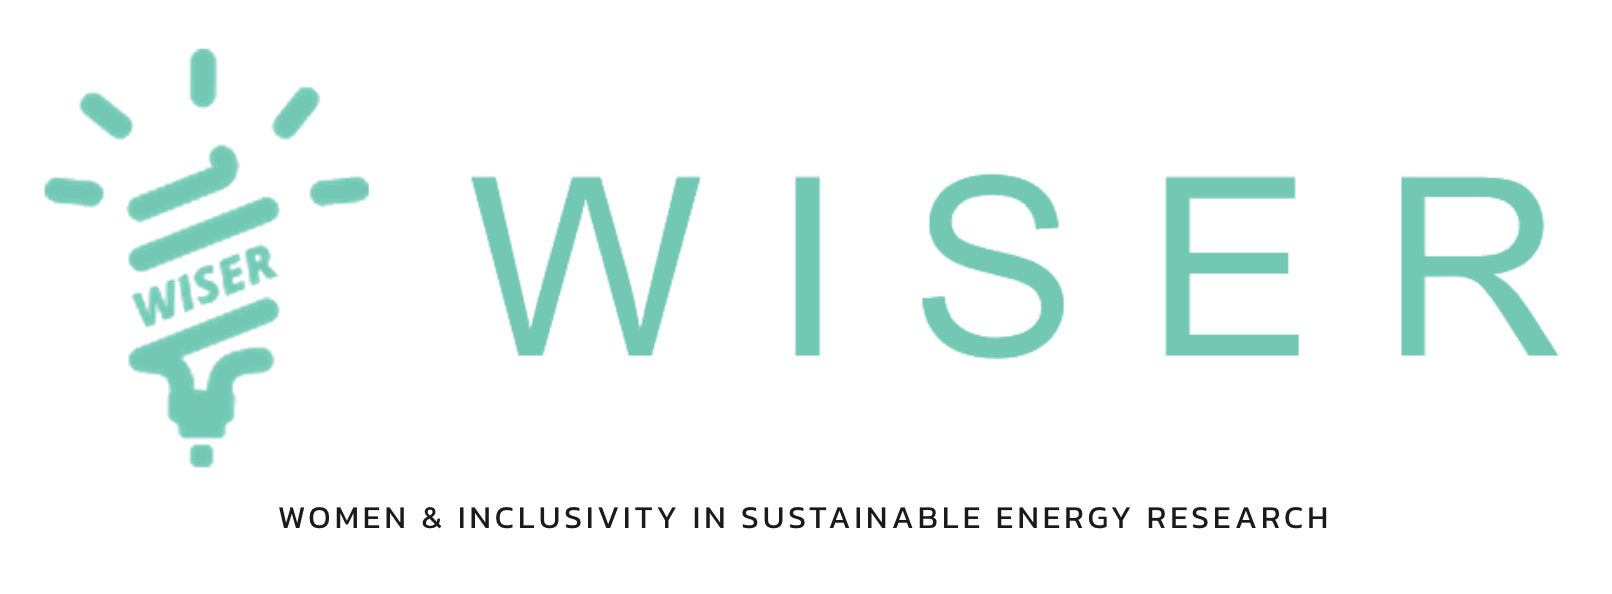 The “Women and Inclusivity in Sustainability Research” network on March 8, 2022